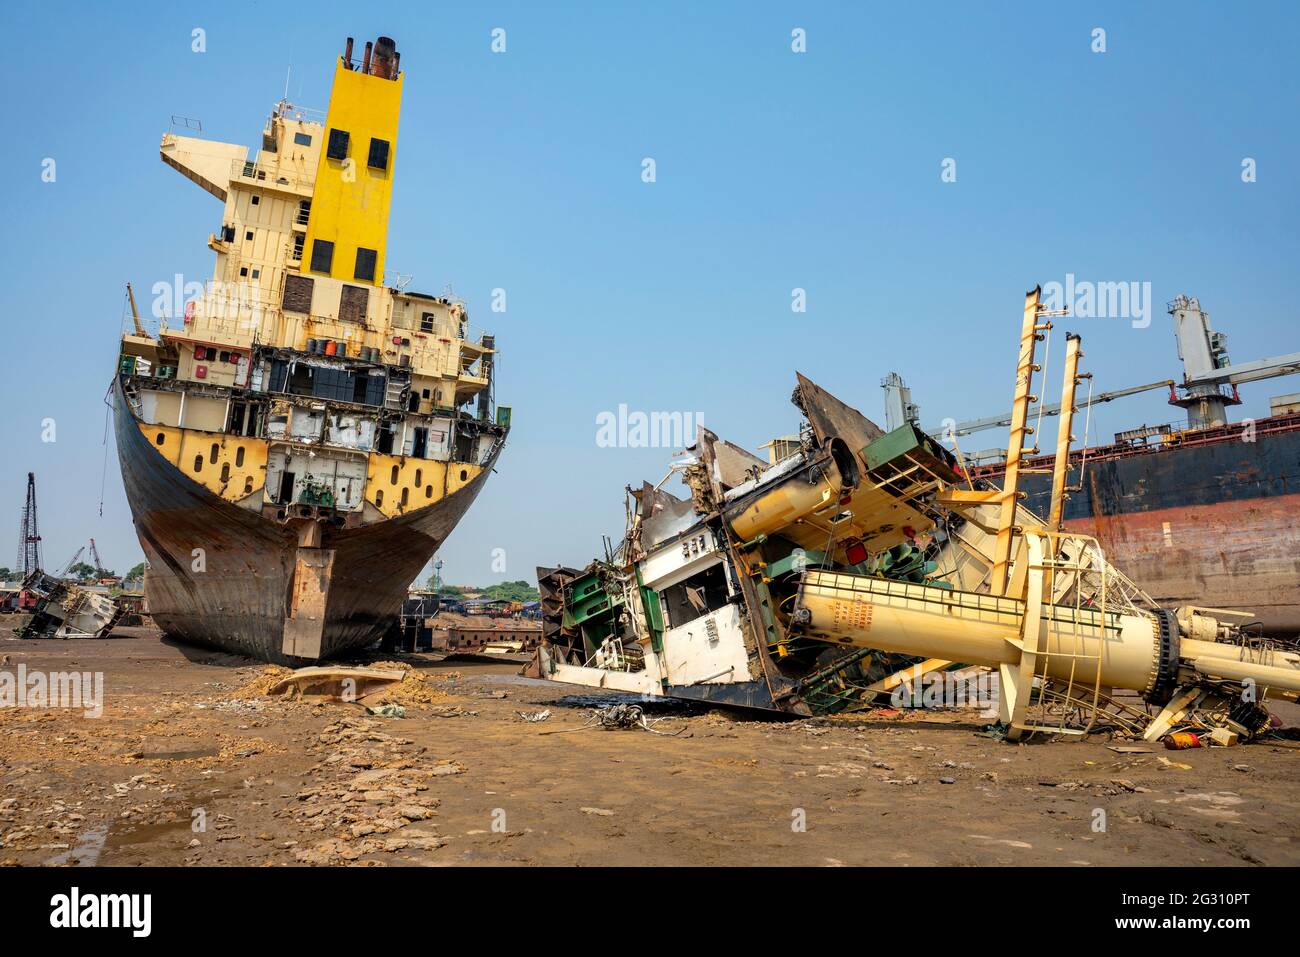 Alang ,01, February,2016: Low angle view of half cut ship with scraped parts and Ship Breaking Yard in background,Bhavnagar Stock Photo